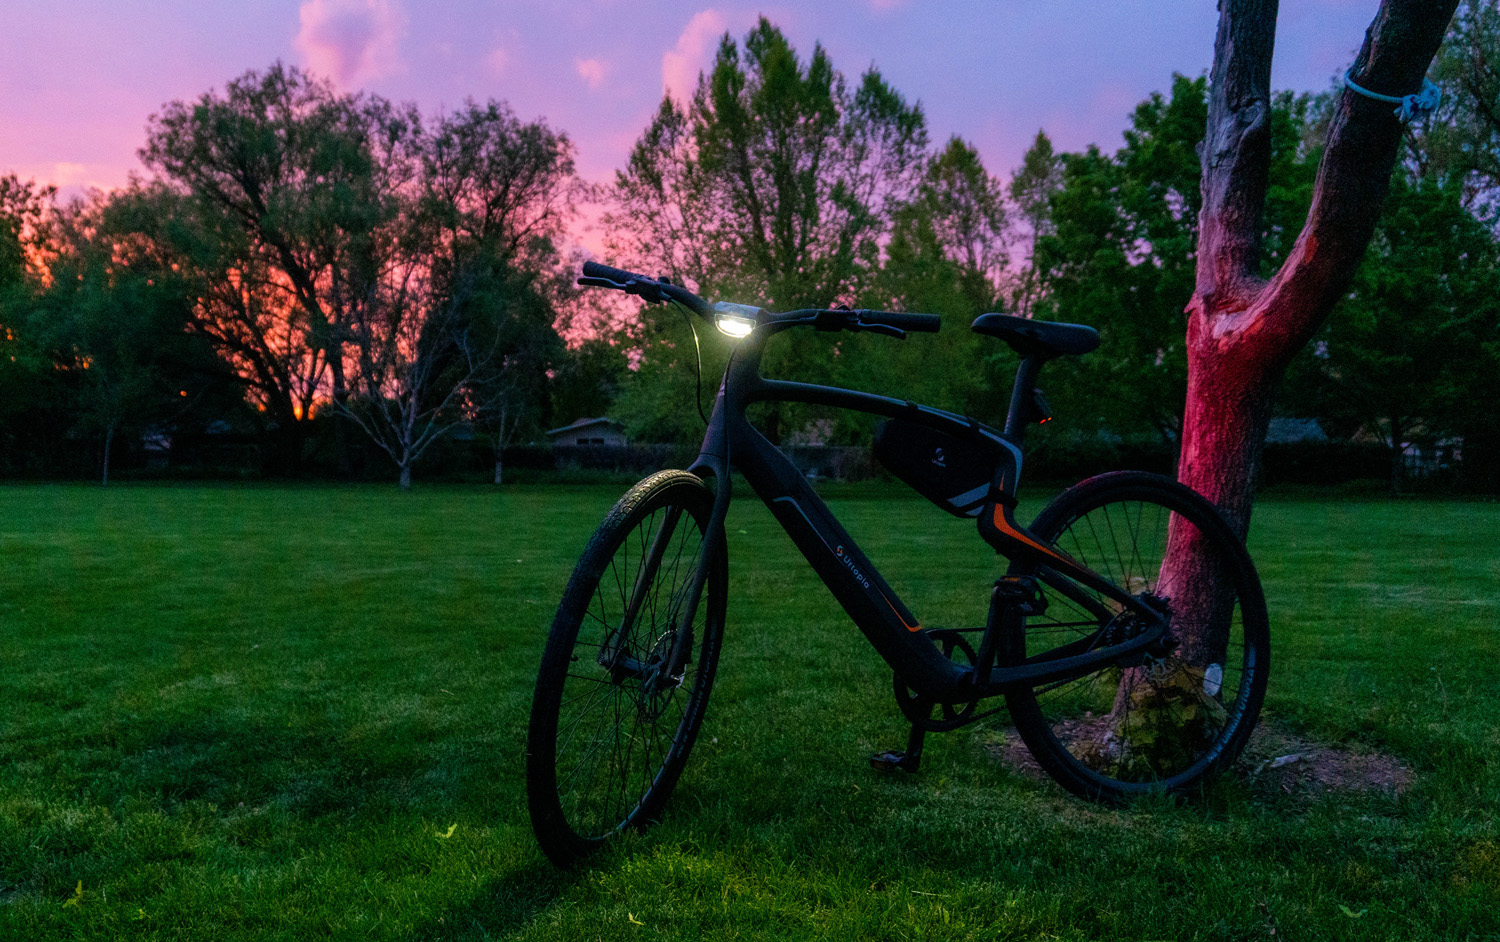 New Urban Urtopia Electric Carbon Fiber Bike E-Bike Leaning against a tree in a grassy park at sunset